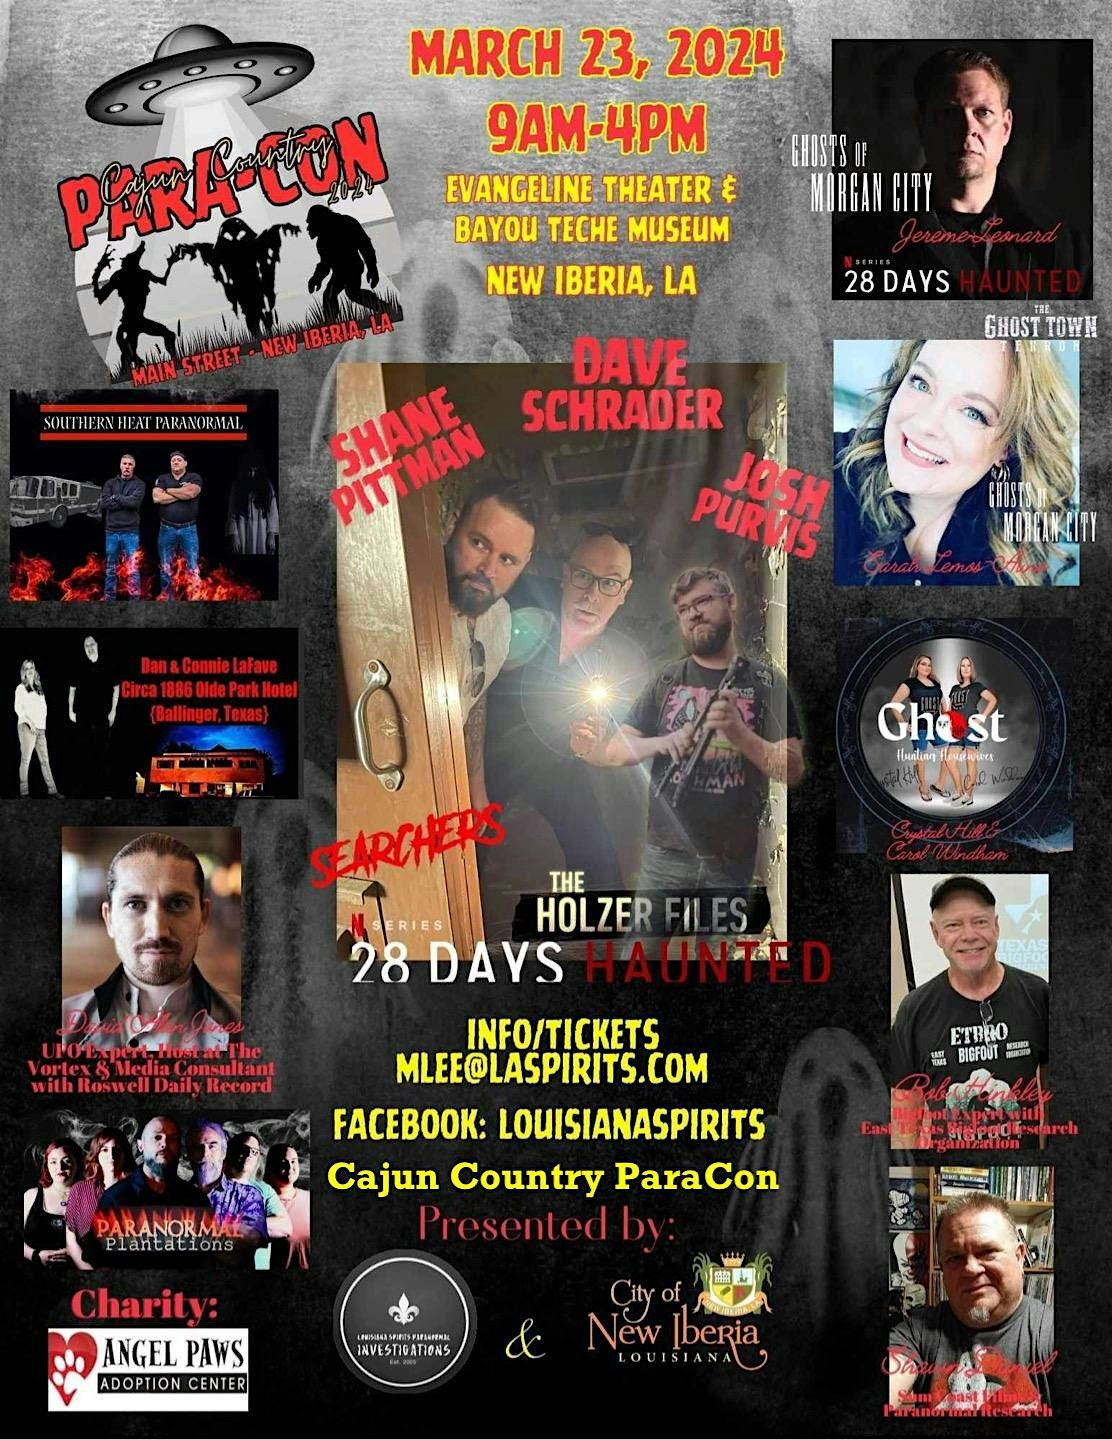 Cajun Country ParaCon 2024, Sliman Theatre for the Performing Arts, New